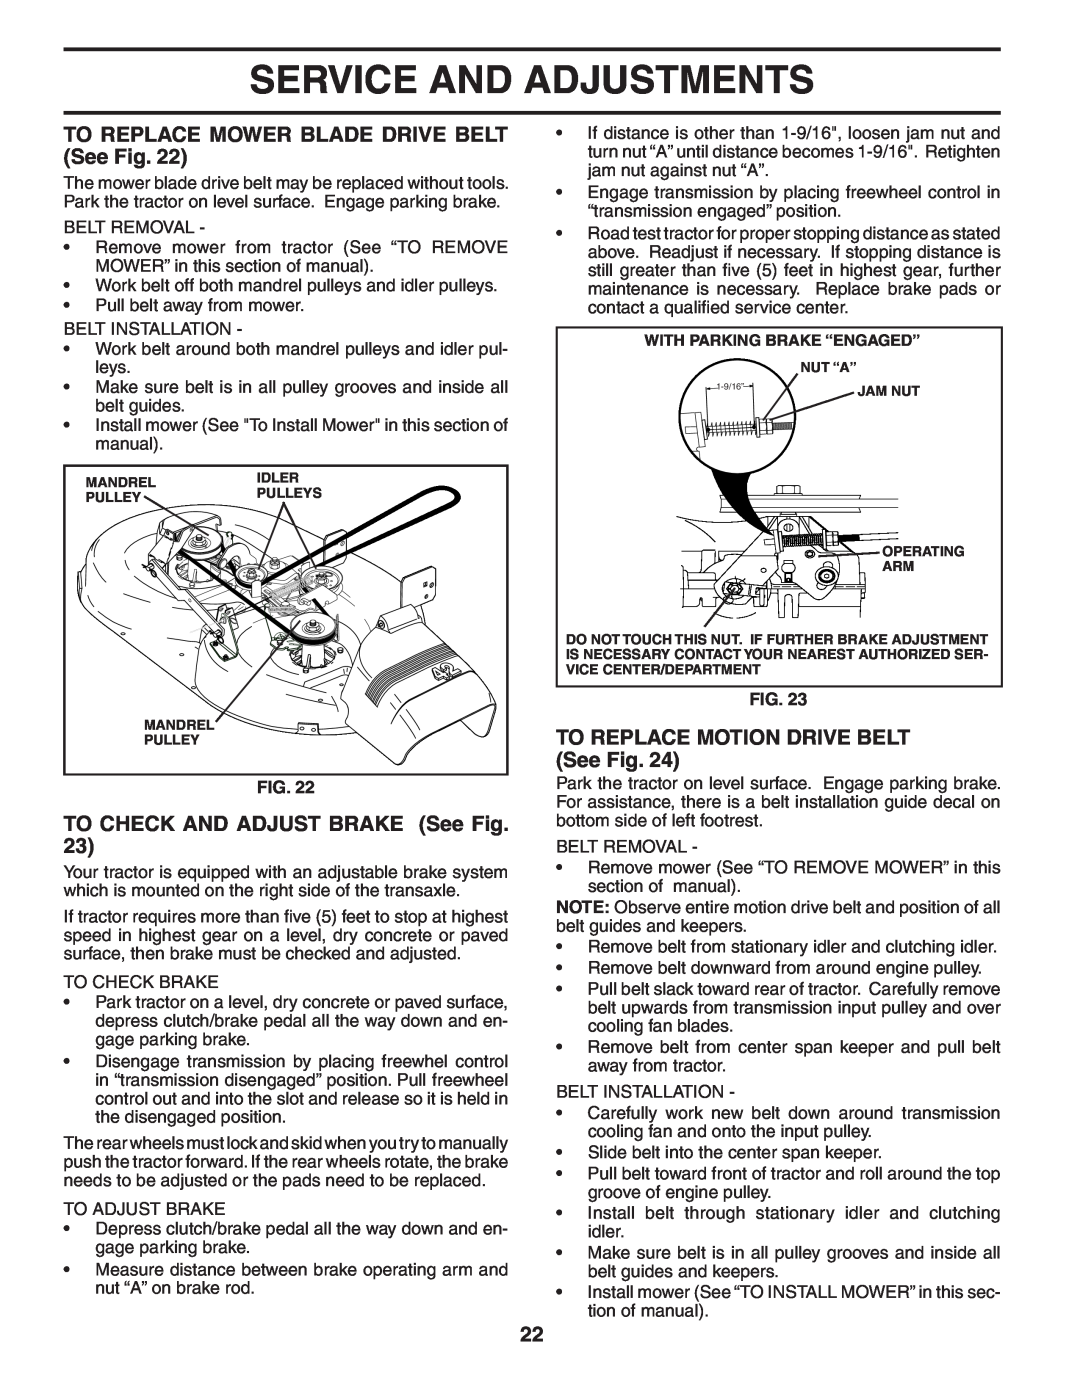 Poulan 188781 TO REPLACE MOWER BLADE DRIVE BELT See Fig, TO CHECK AND ADJUST BRAKE See Fig, Service And Adjustments 